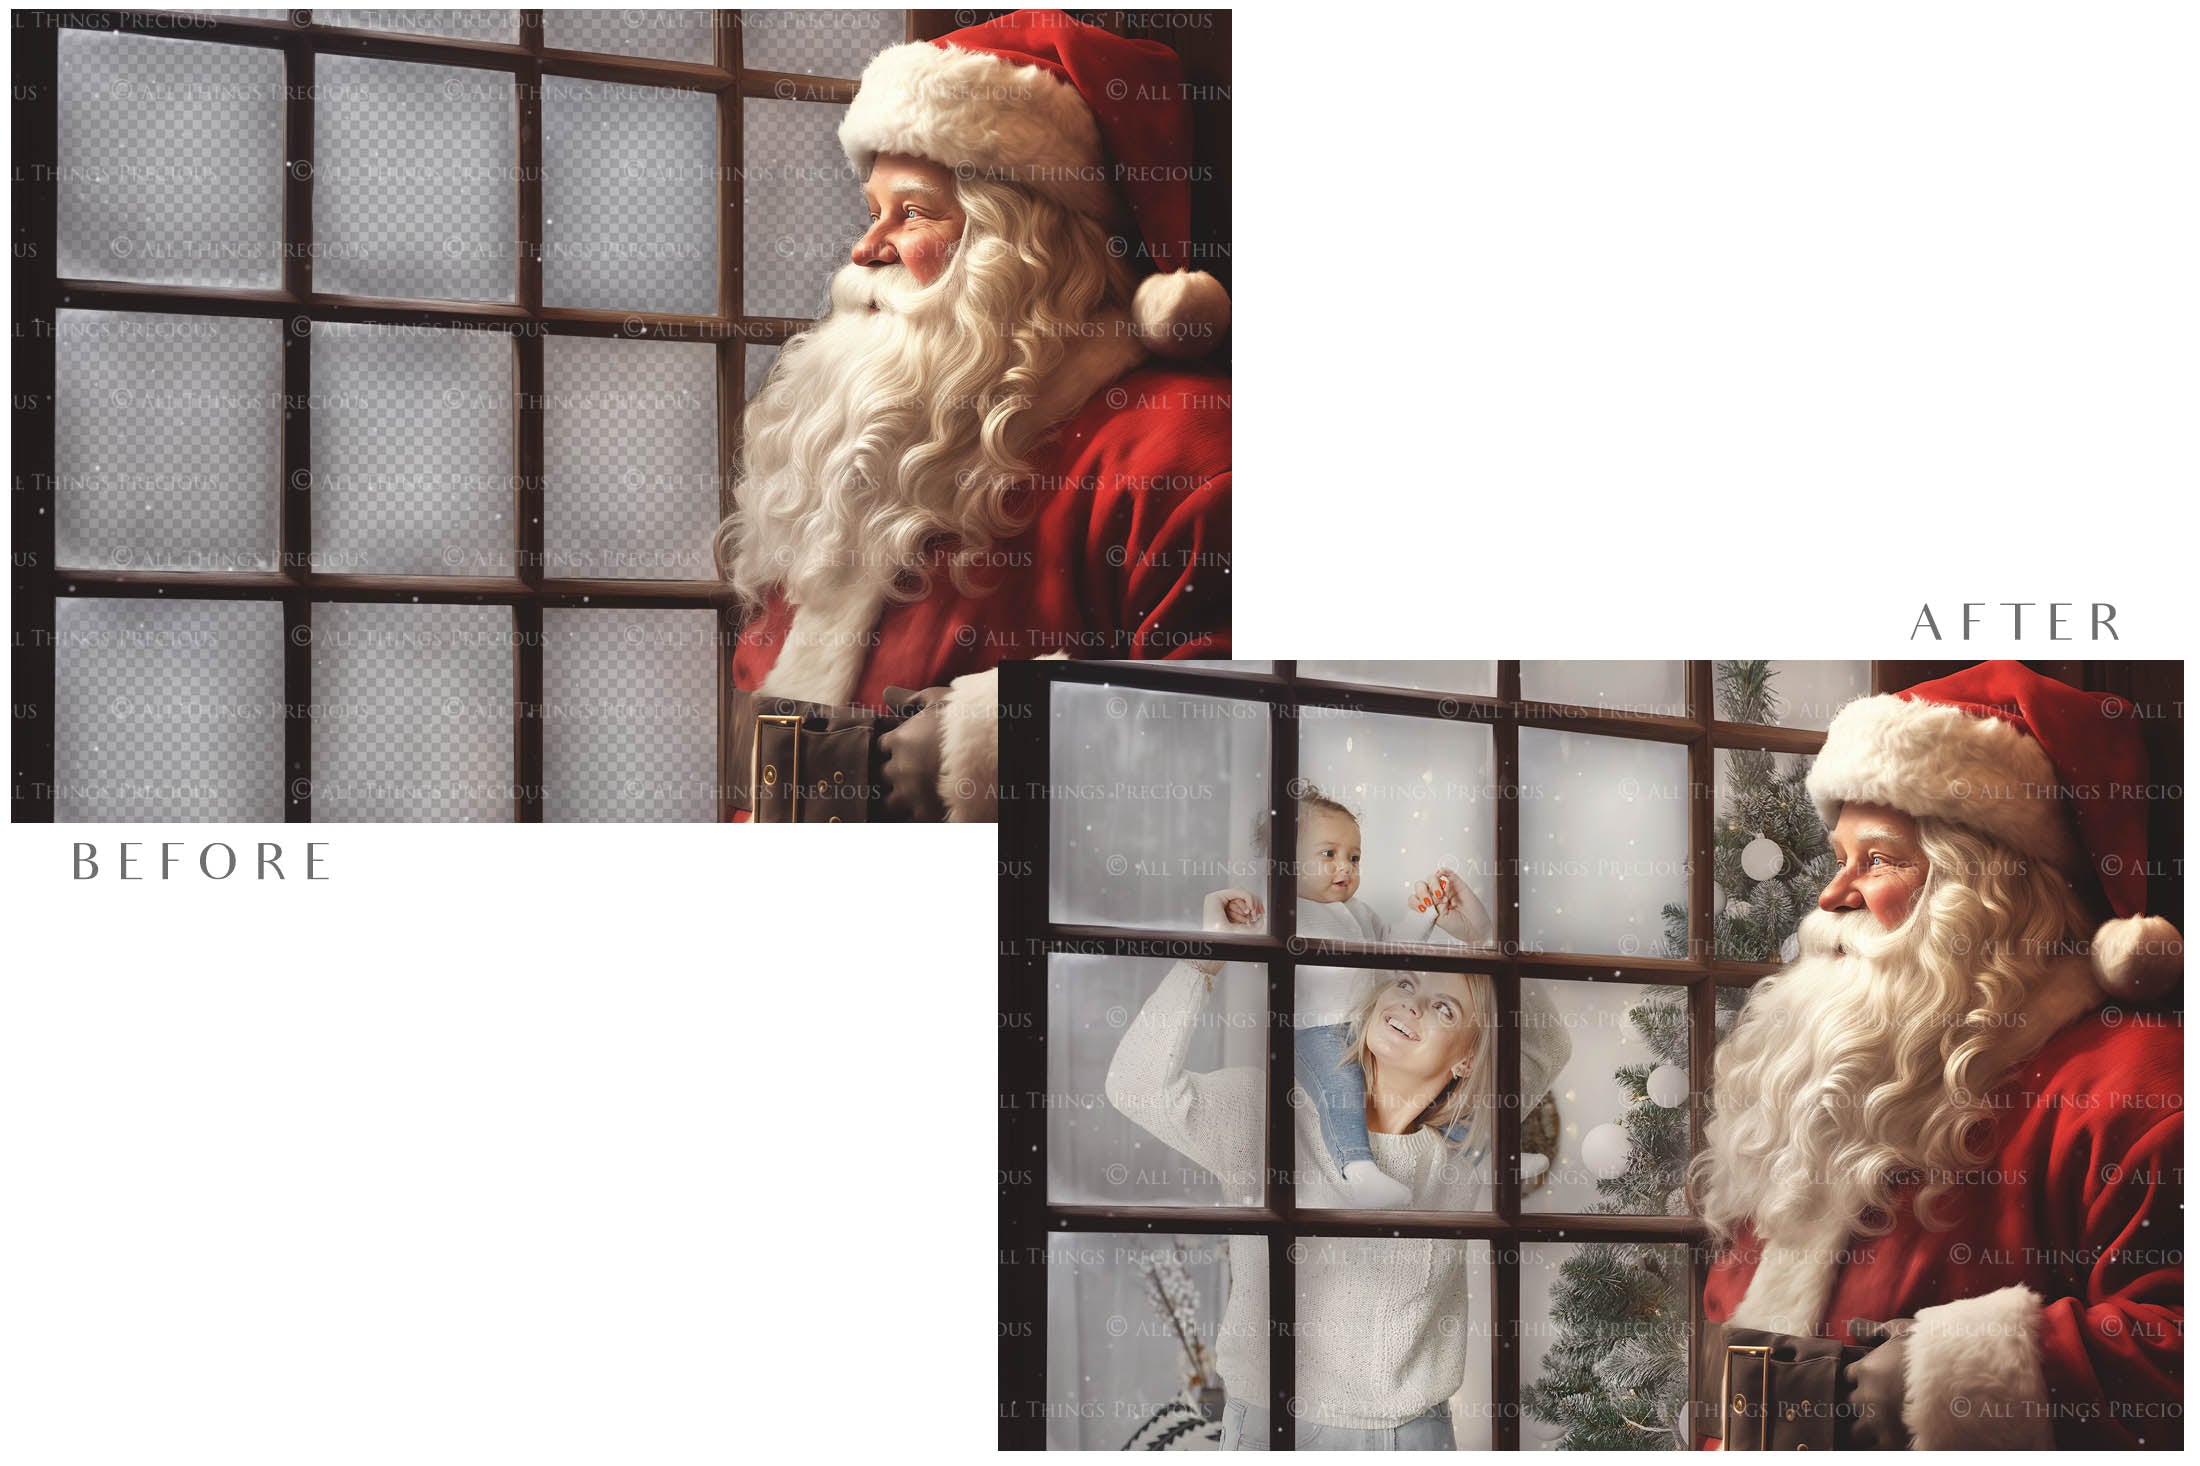 Digital Santa Window Background, with snow flurries and a PSD Template included in the set. The Window has a glass effect and is transparent, perfect for you to add your own images and retain the effect. Use for Digital Cards, Printed Art, Scrapbooking or for photography. Find more at www.atptextures.com